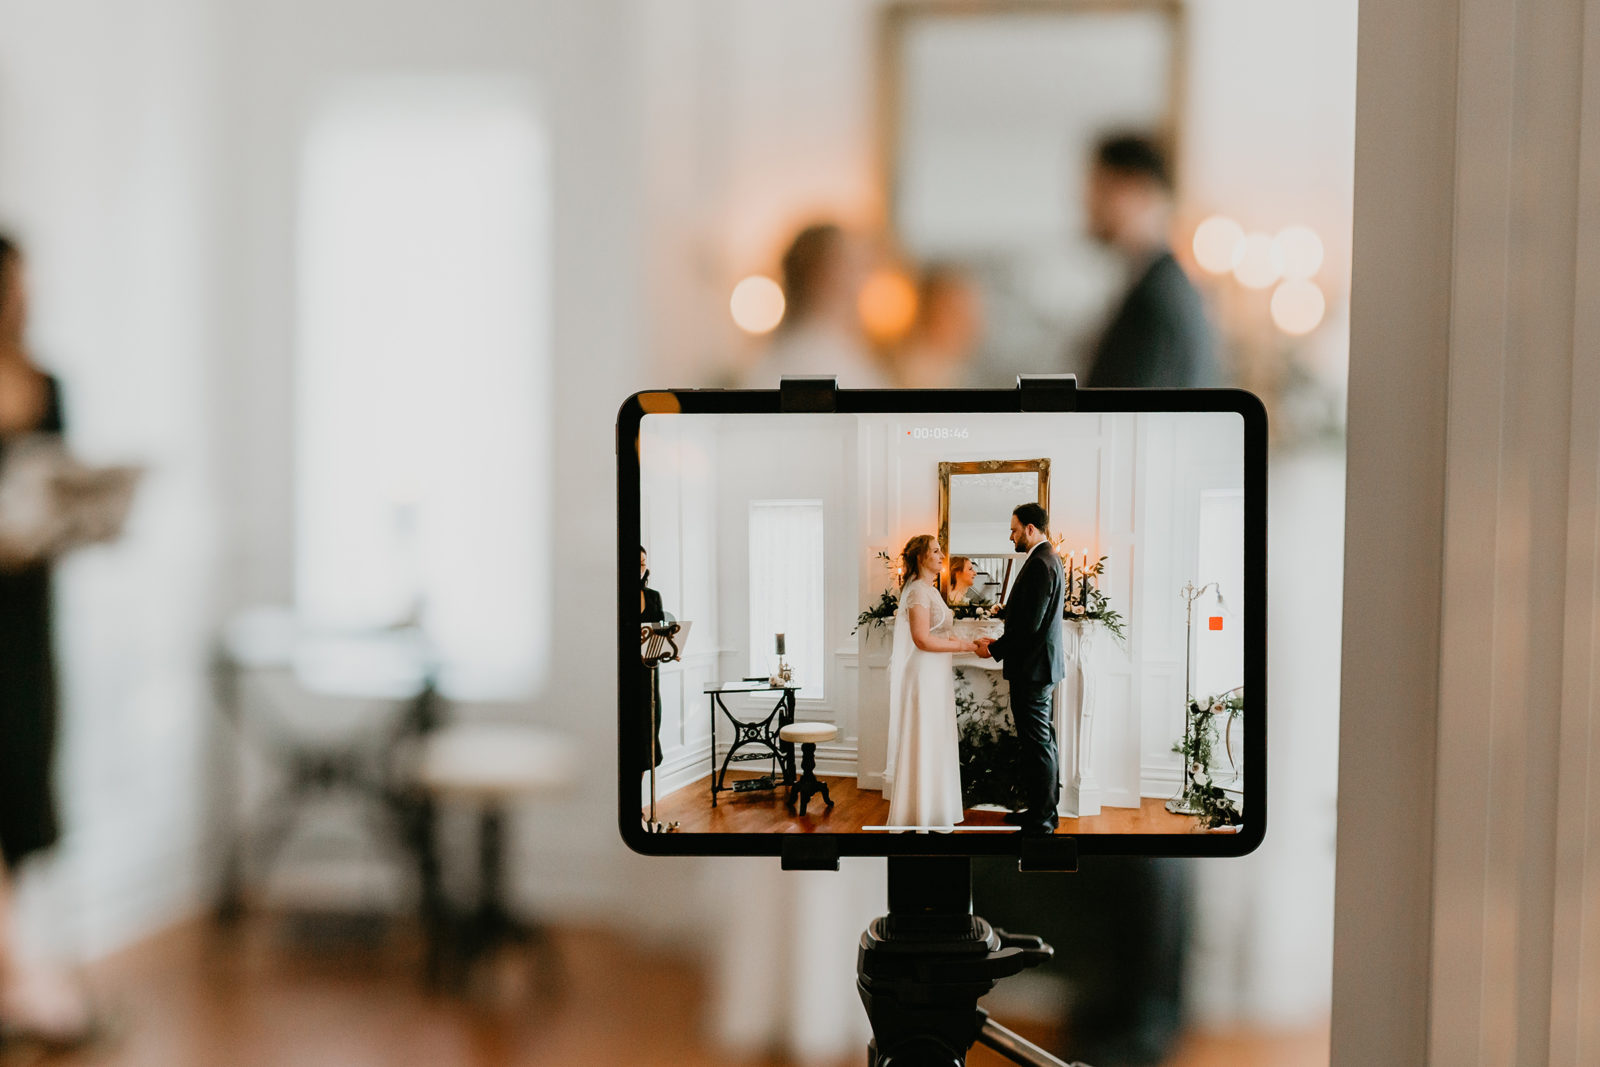 Helpful Tips for Livestreaming Your Ceremony